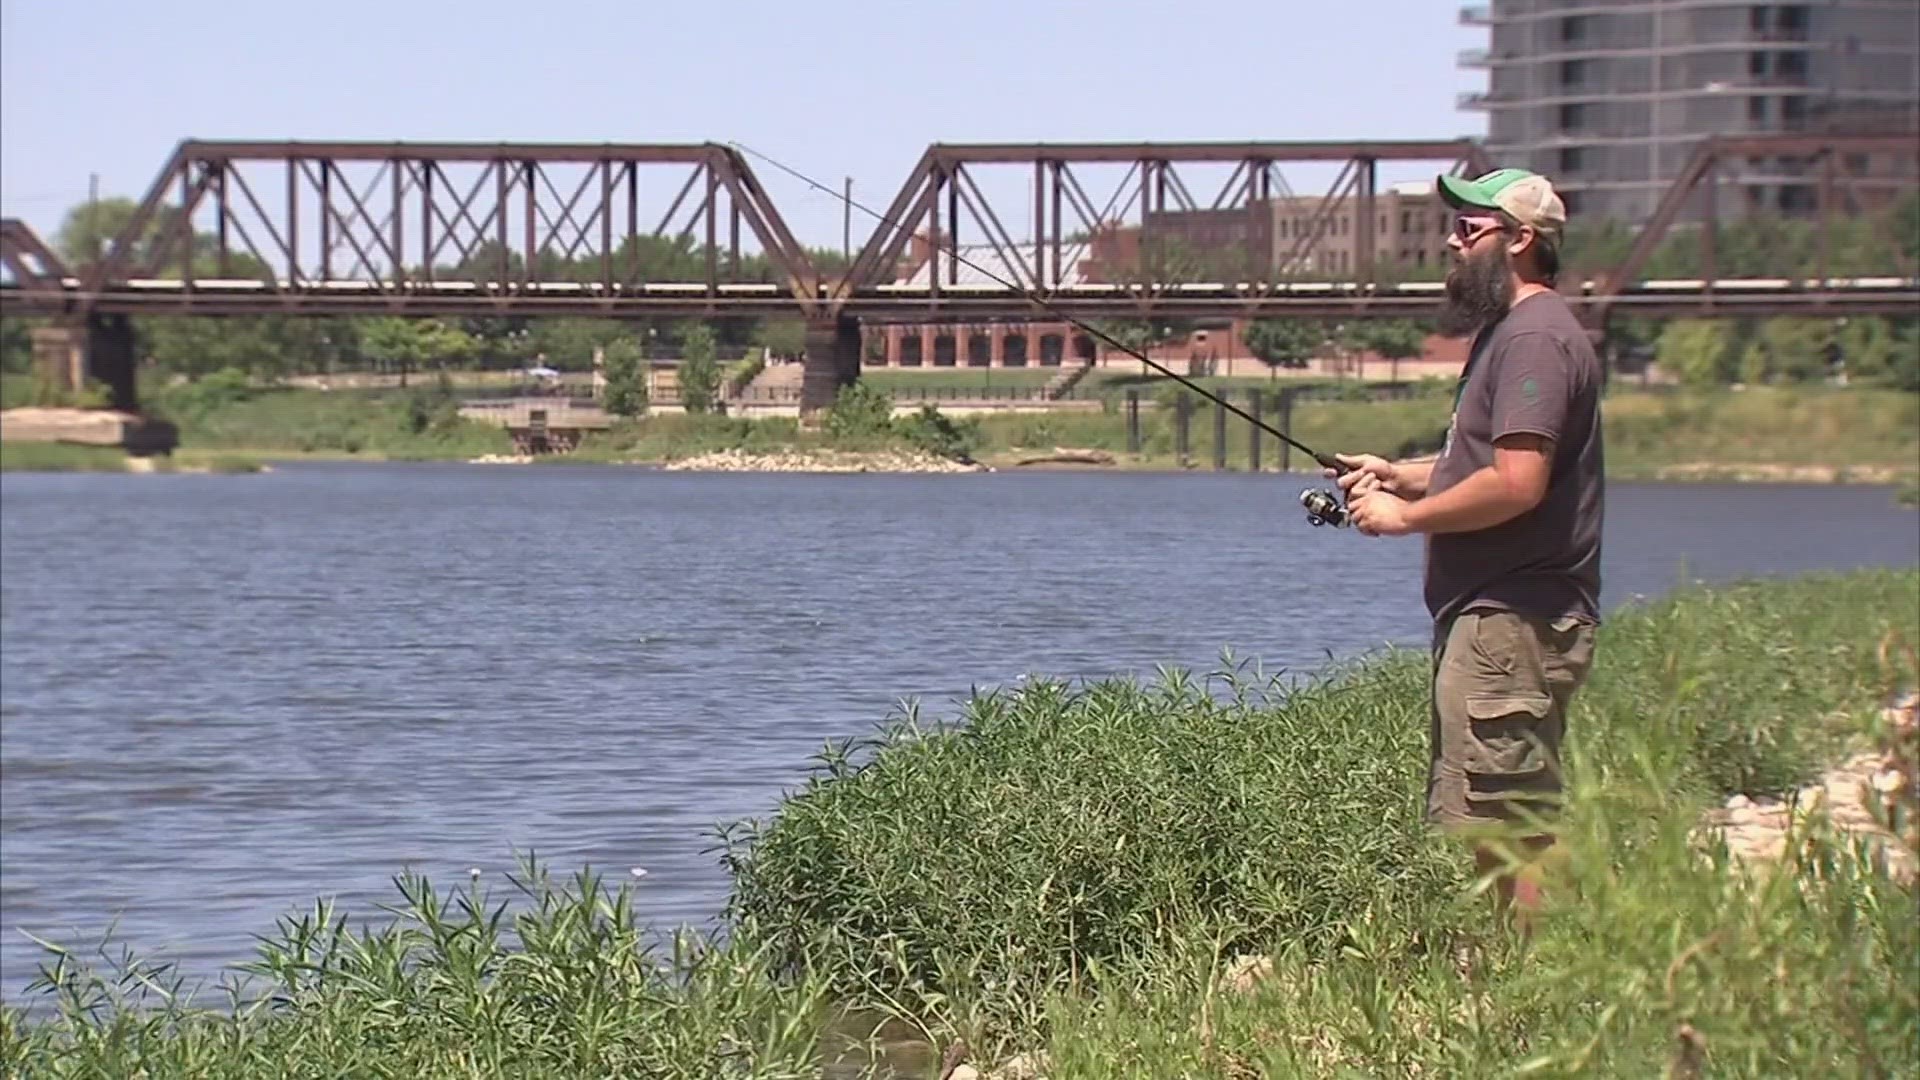 At hundreds of public fishing locations across the state, those who are 16 years or older can fish for free without a fishing license for two days this year.